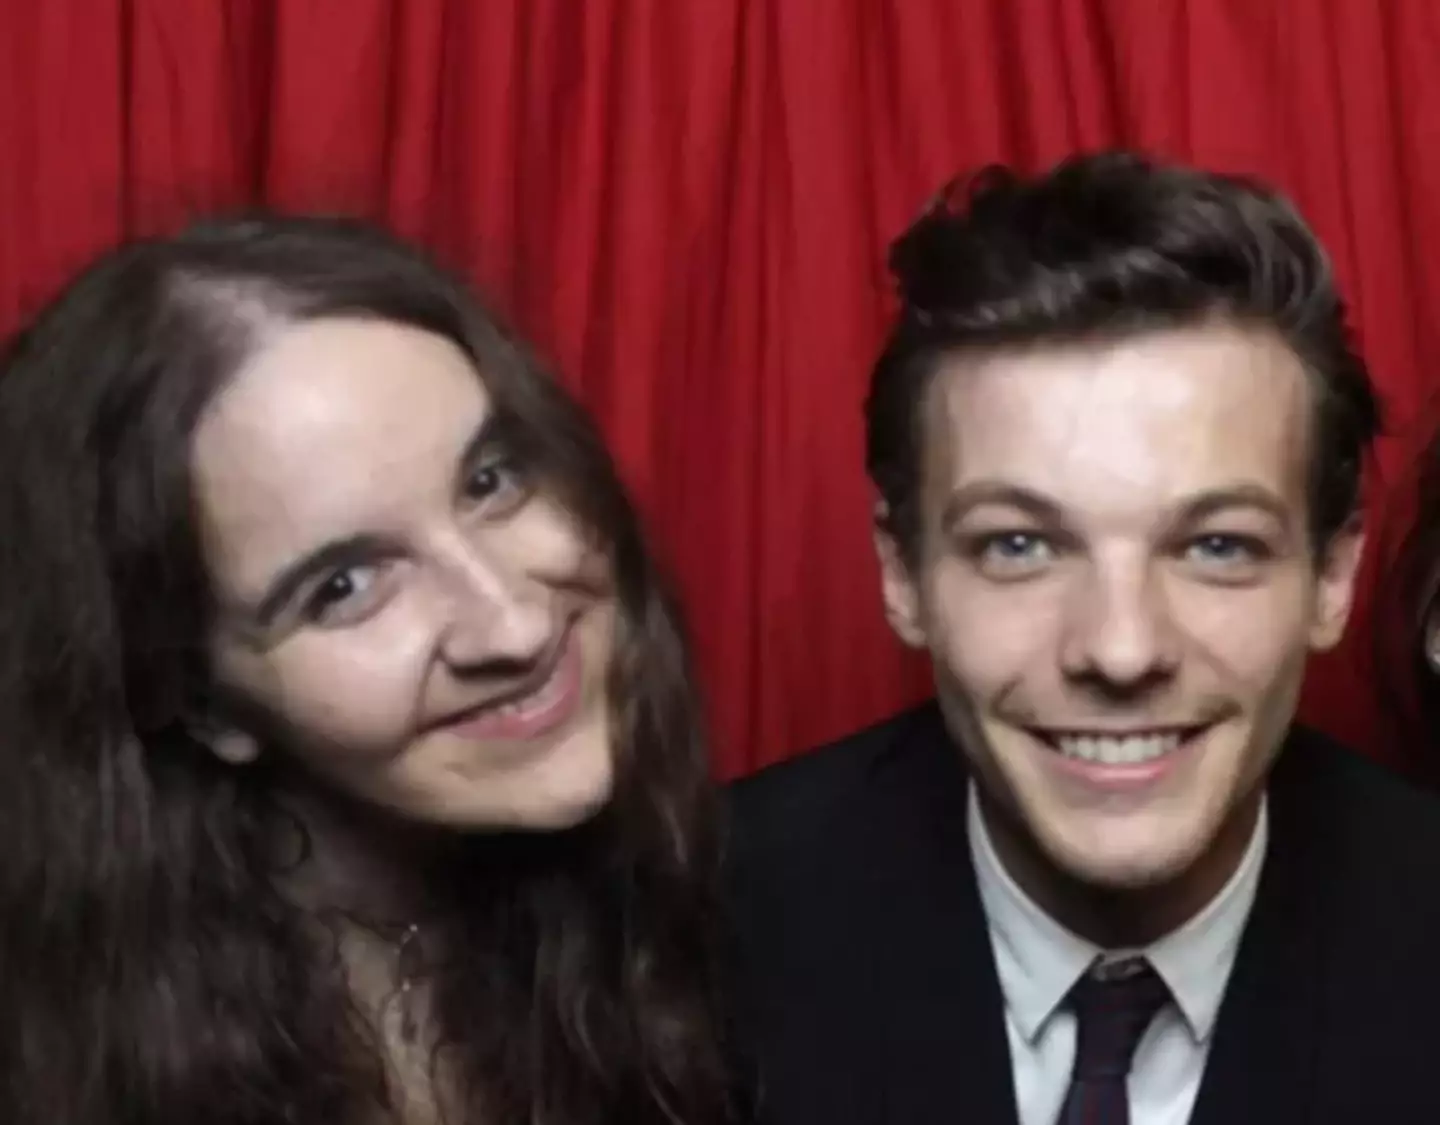 Megan met Louis Tomlinson from One Direction through the charity.